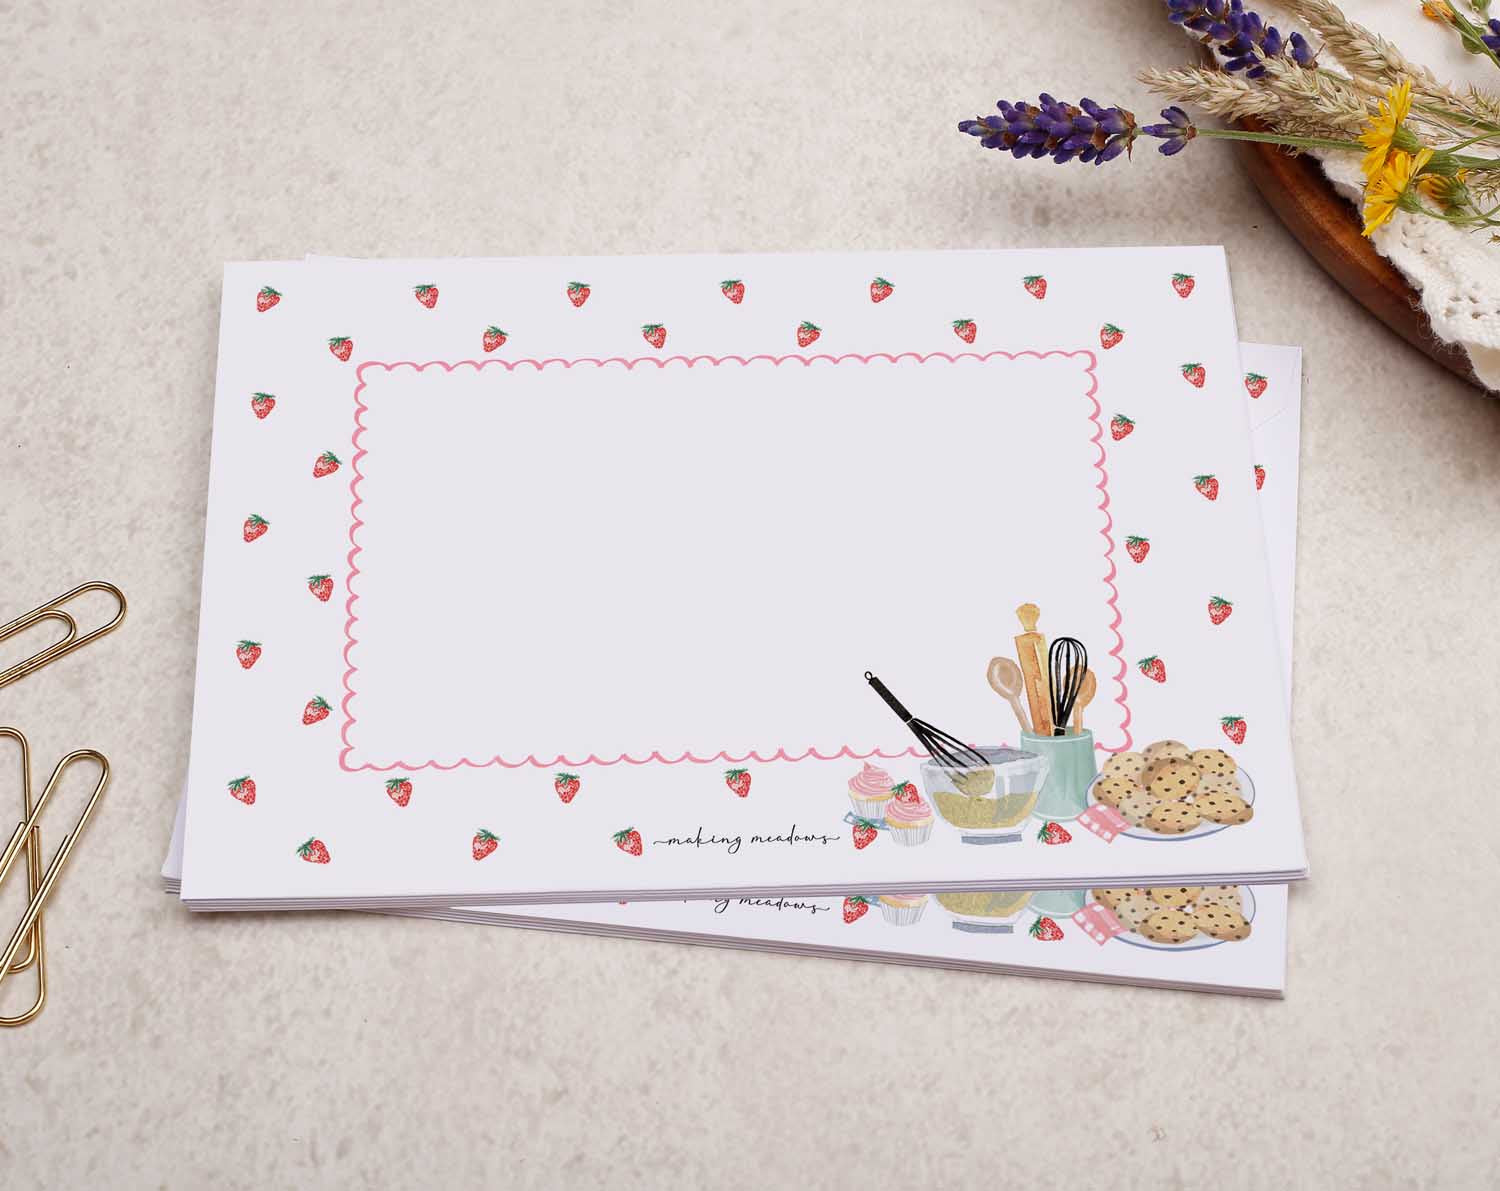 cake baking A5 writing paper set comes with matching envelopes